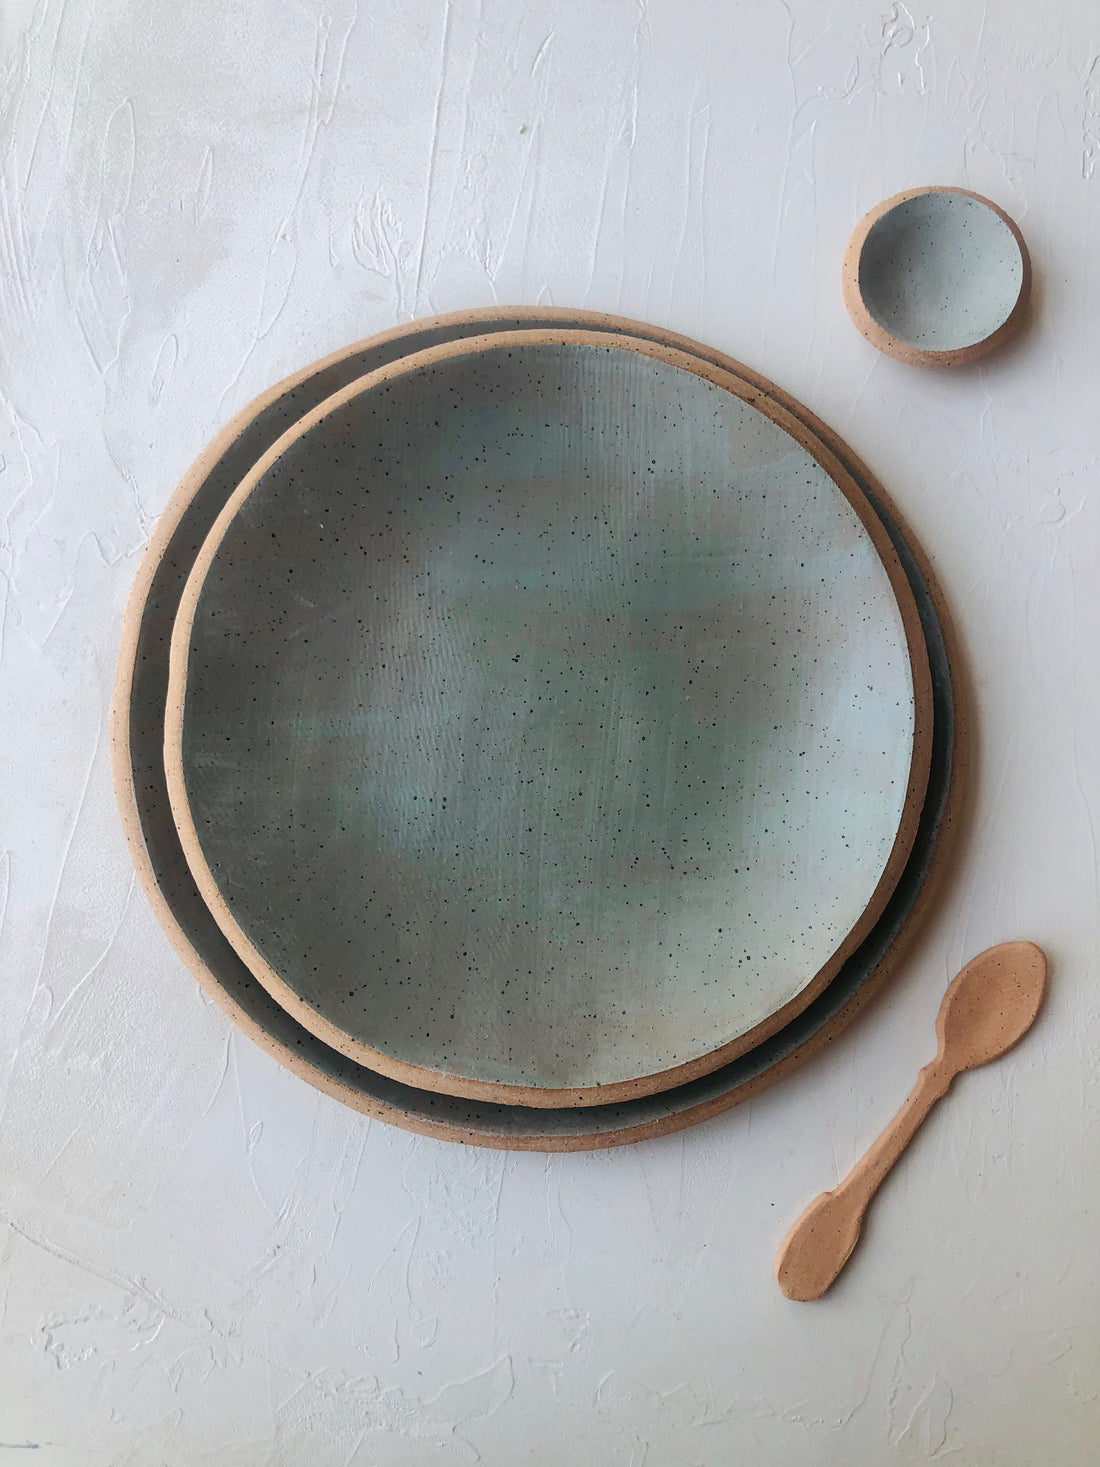 10.5 inch Orb Plate in Sage